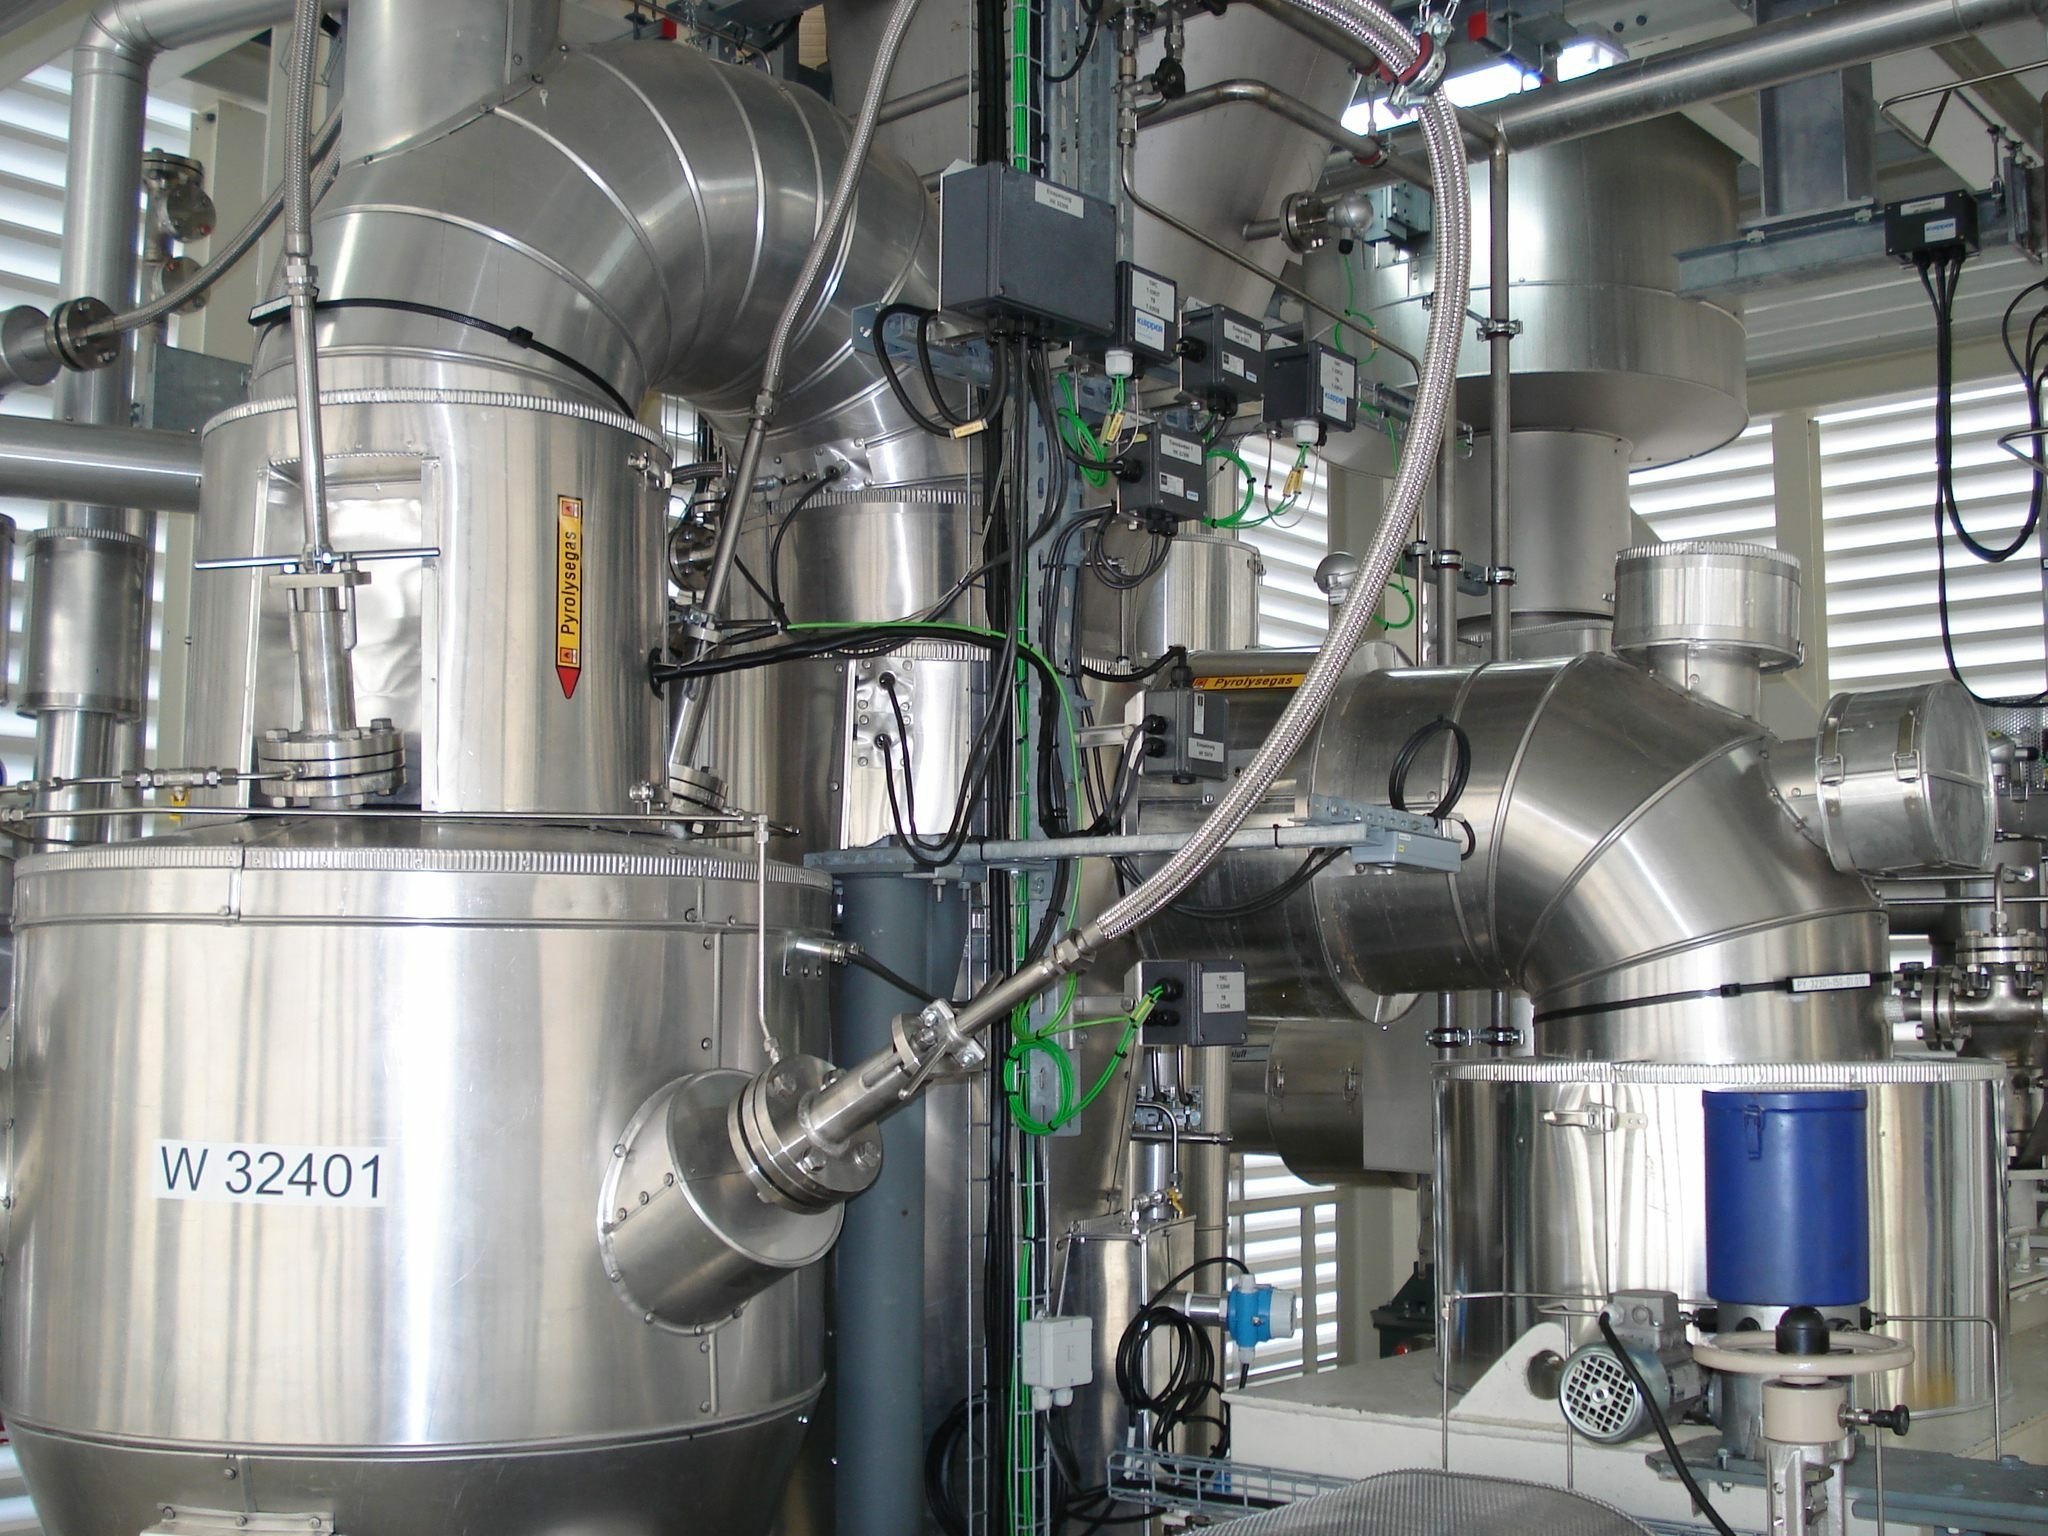 The photo shows an industrial plat for the production of synthetic fuel.